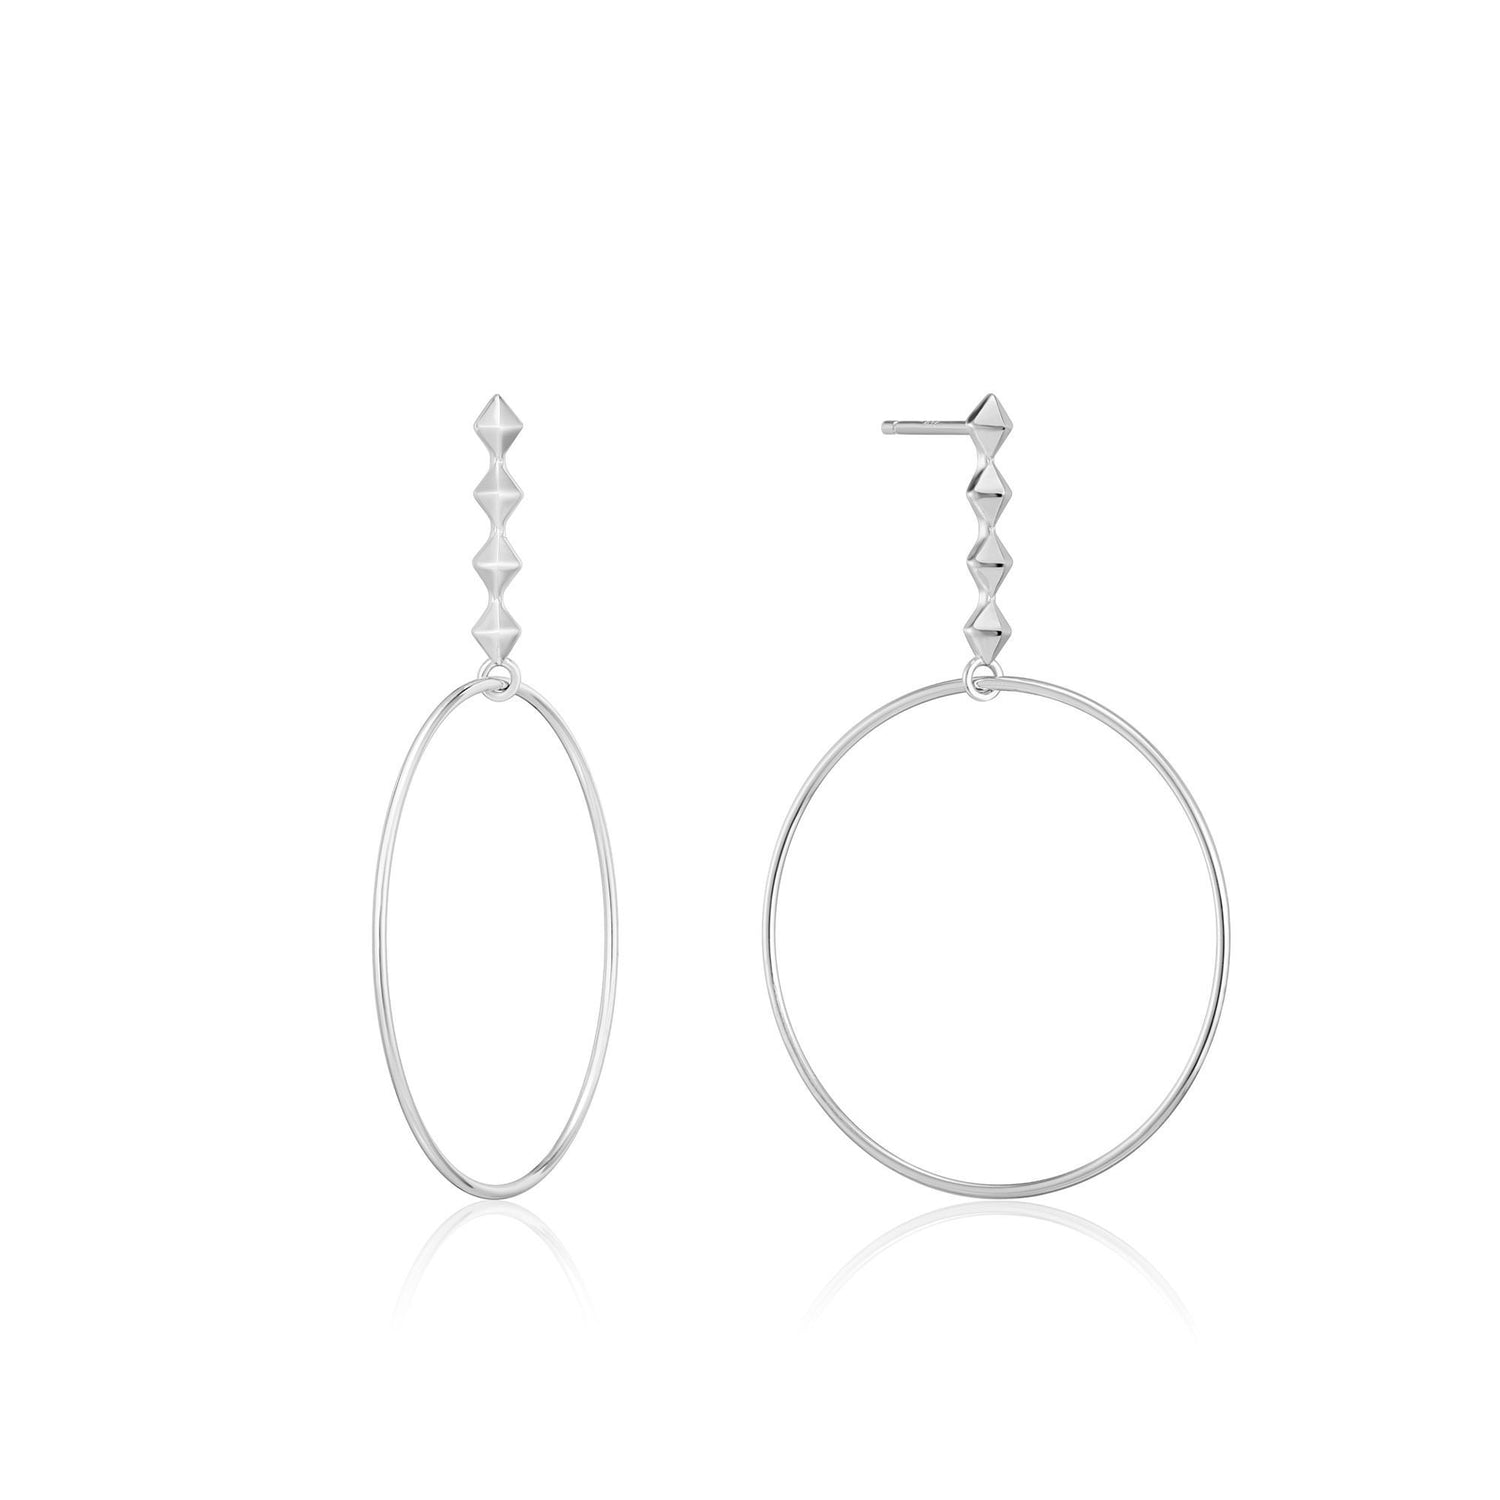 ANIA HAIE ANIA HAIE - Silver Spike Hoop Earrings available at The Good Life Boutique